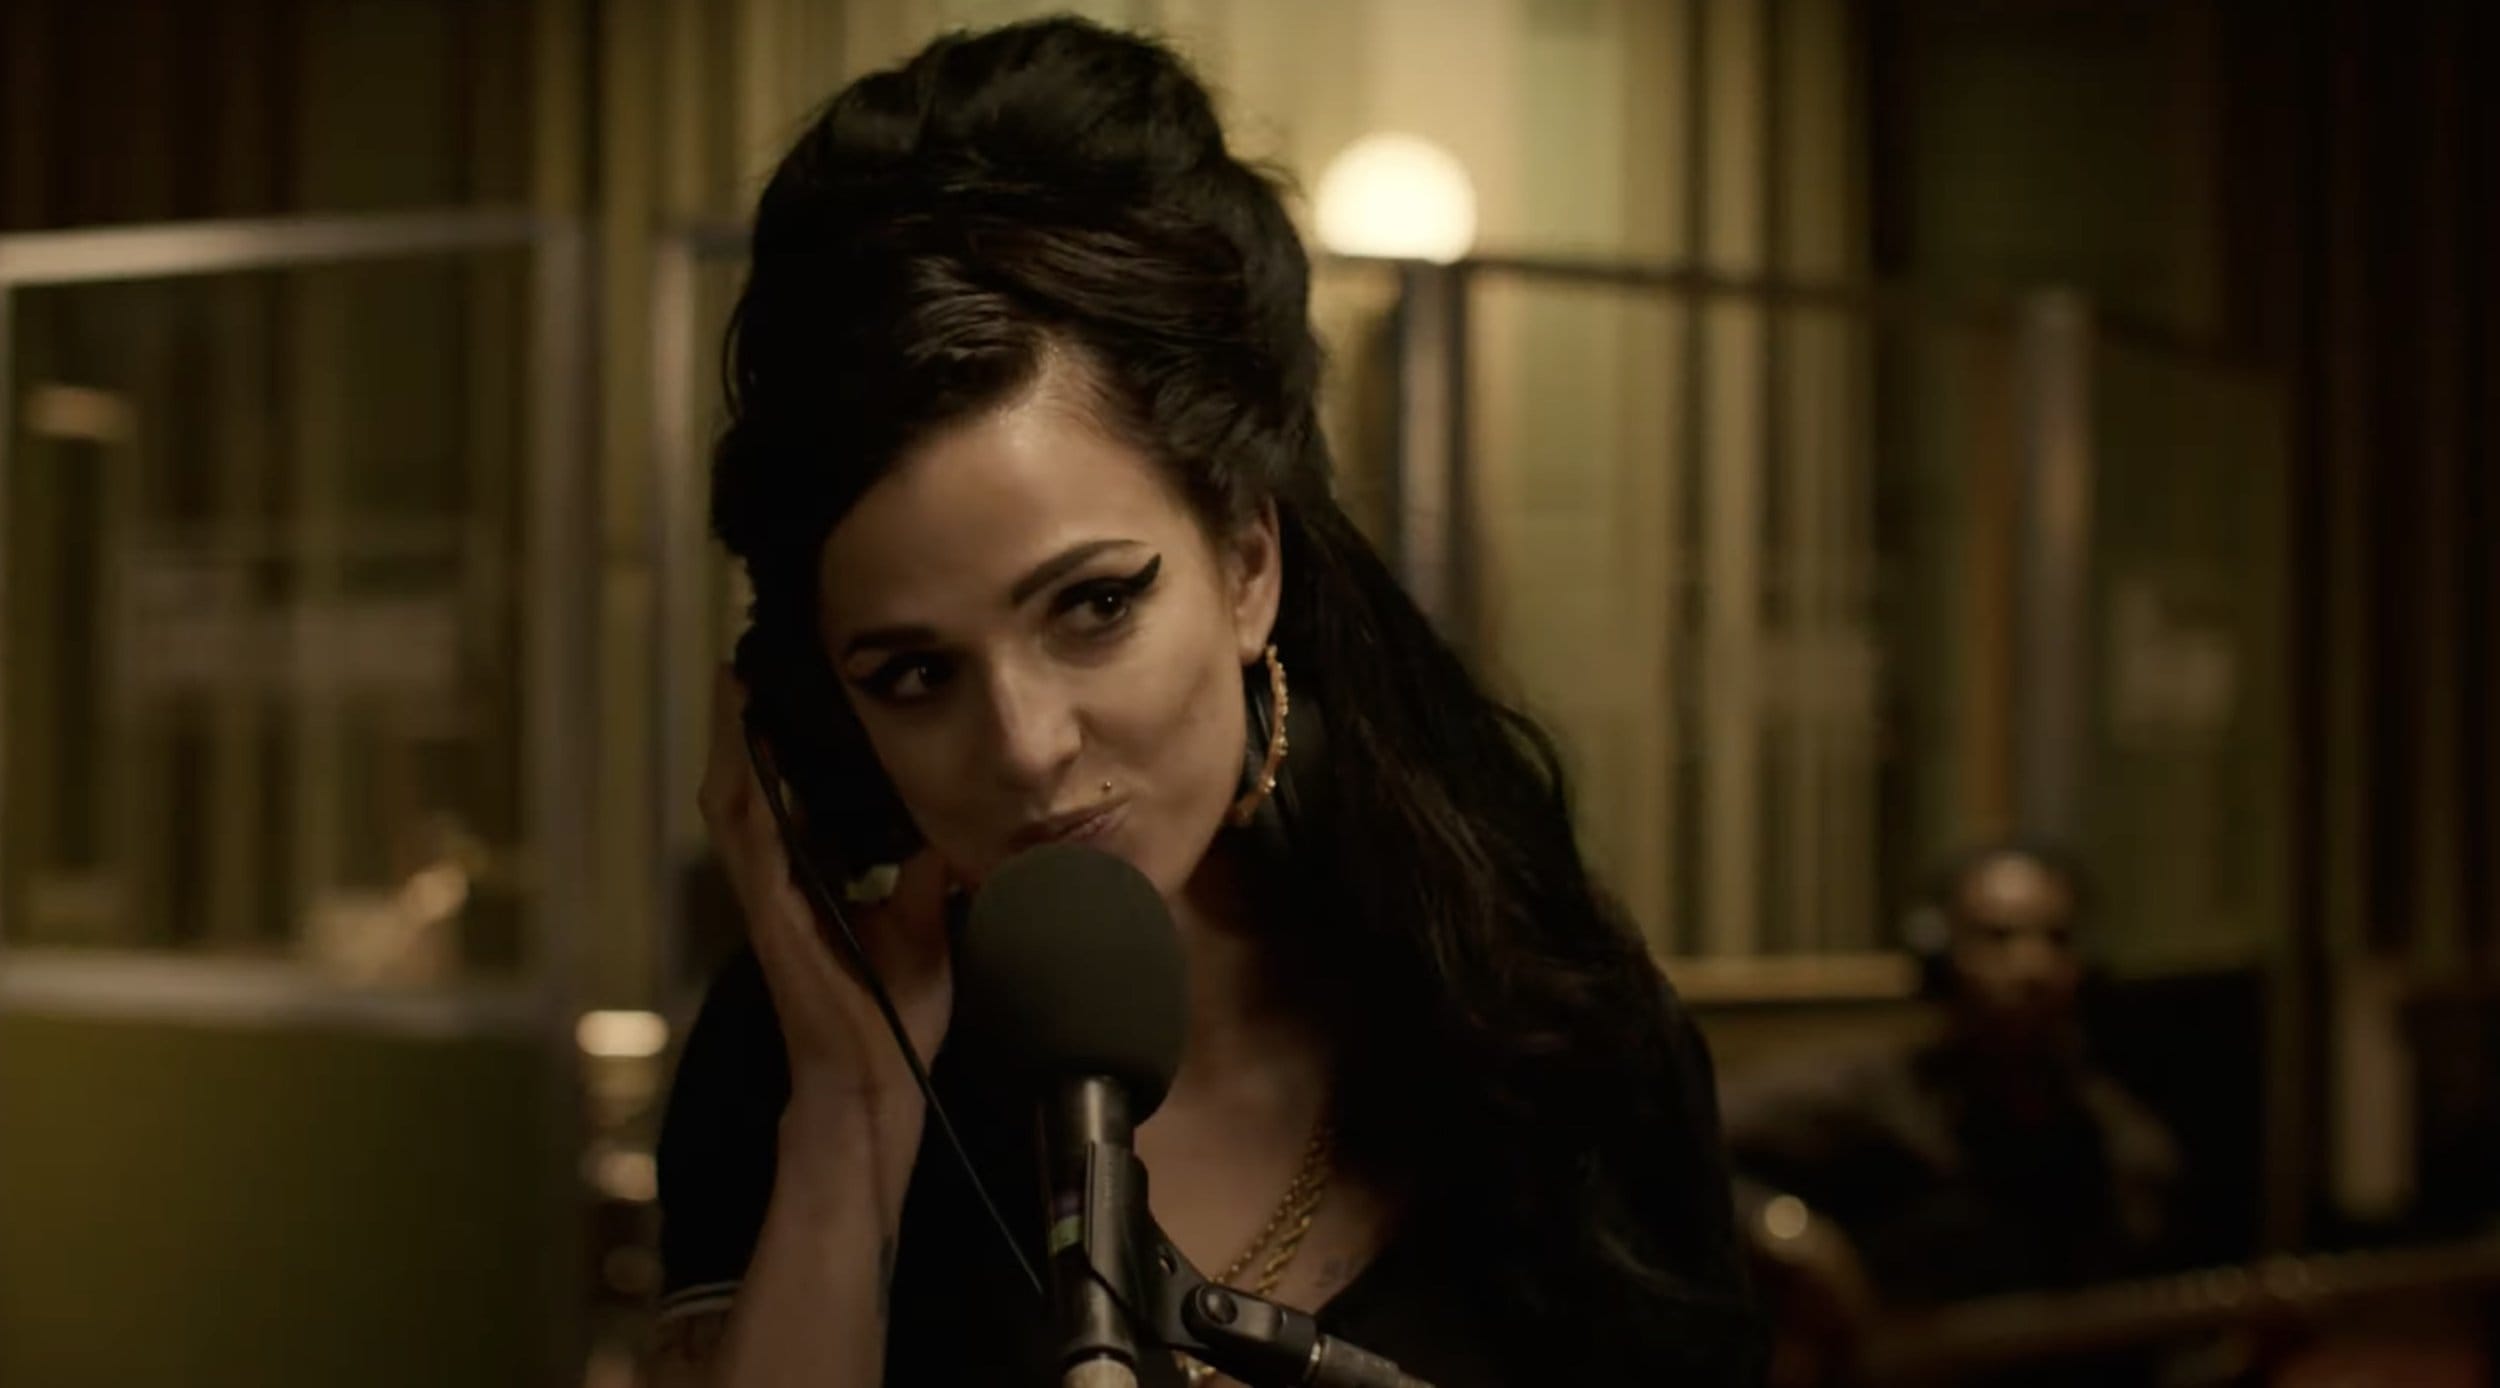 Amy Winehouse 'Back to Black' biopic movie trailer released